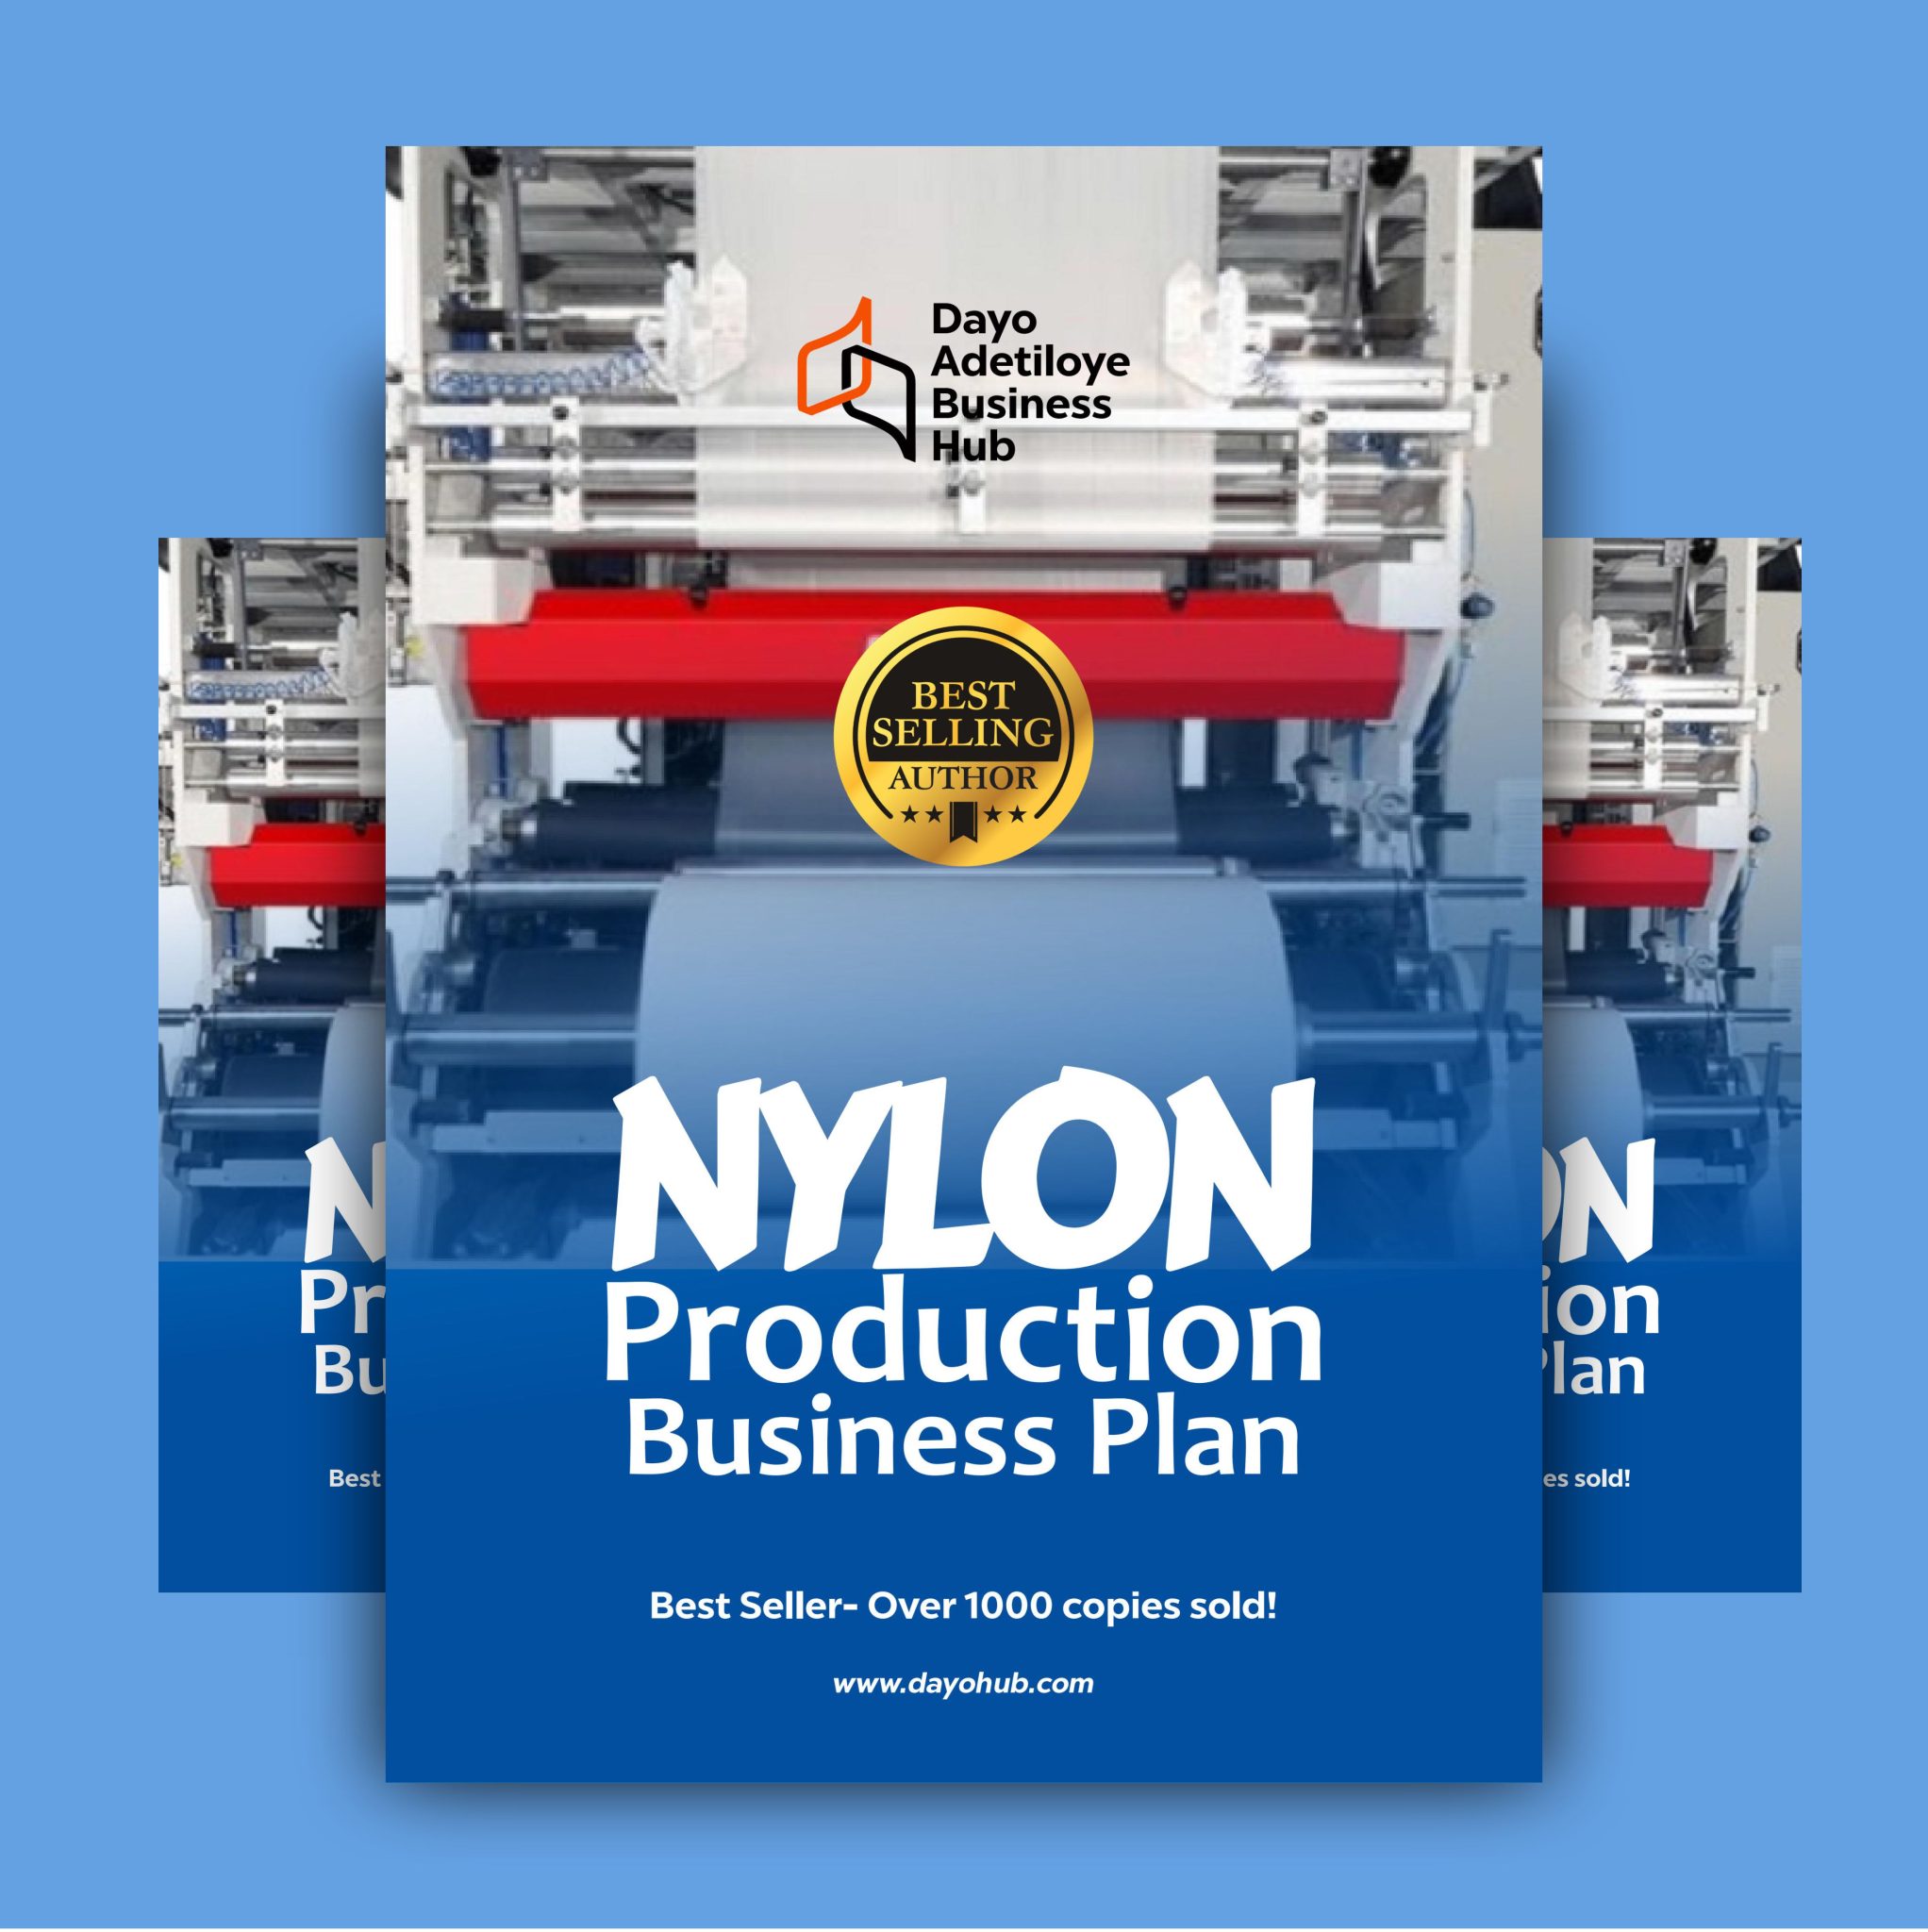 business plan for nylon production in nigeria